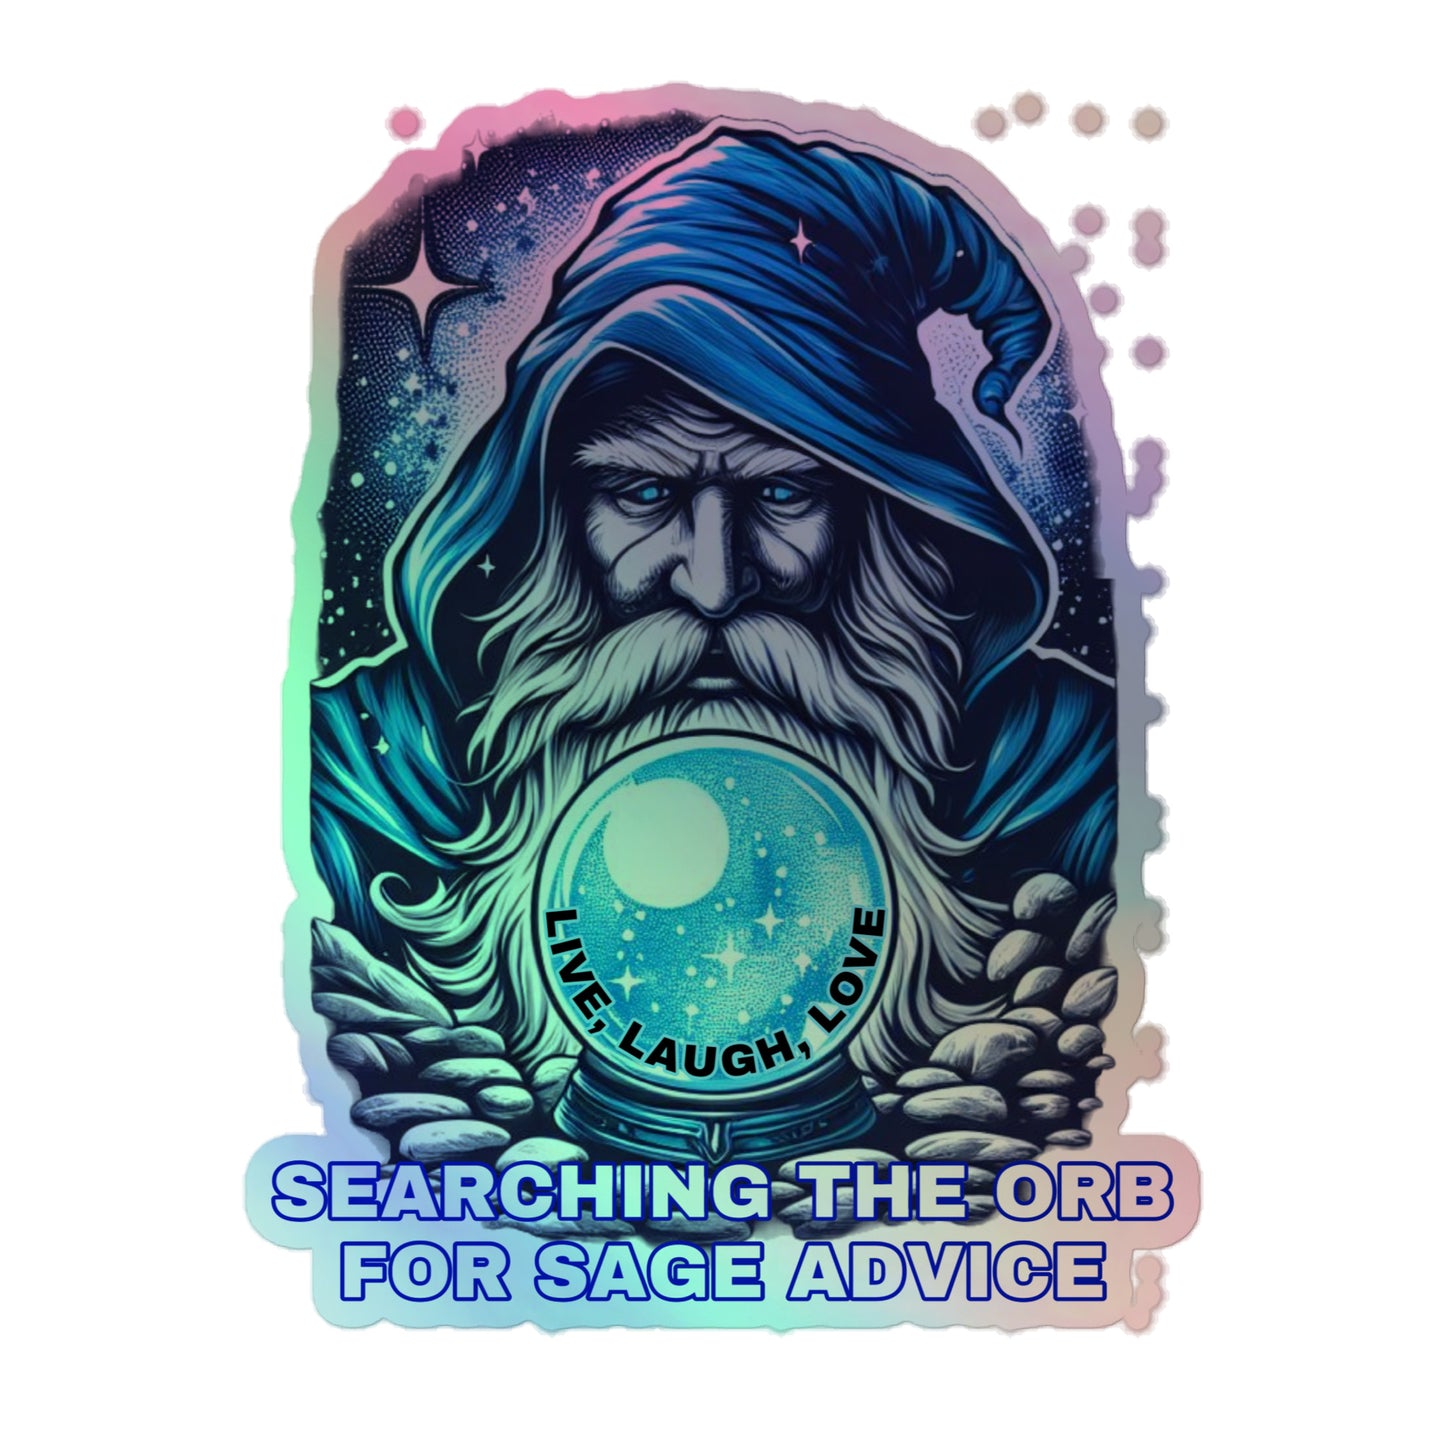 Searching the orb (sticker)